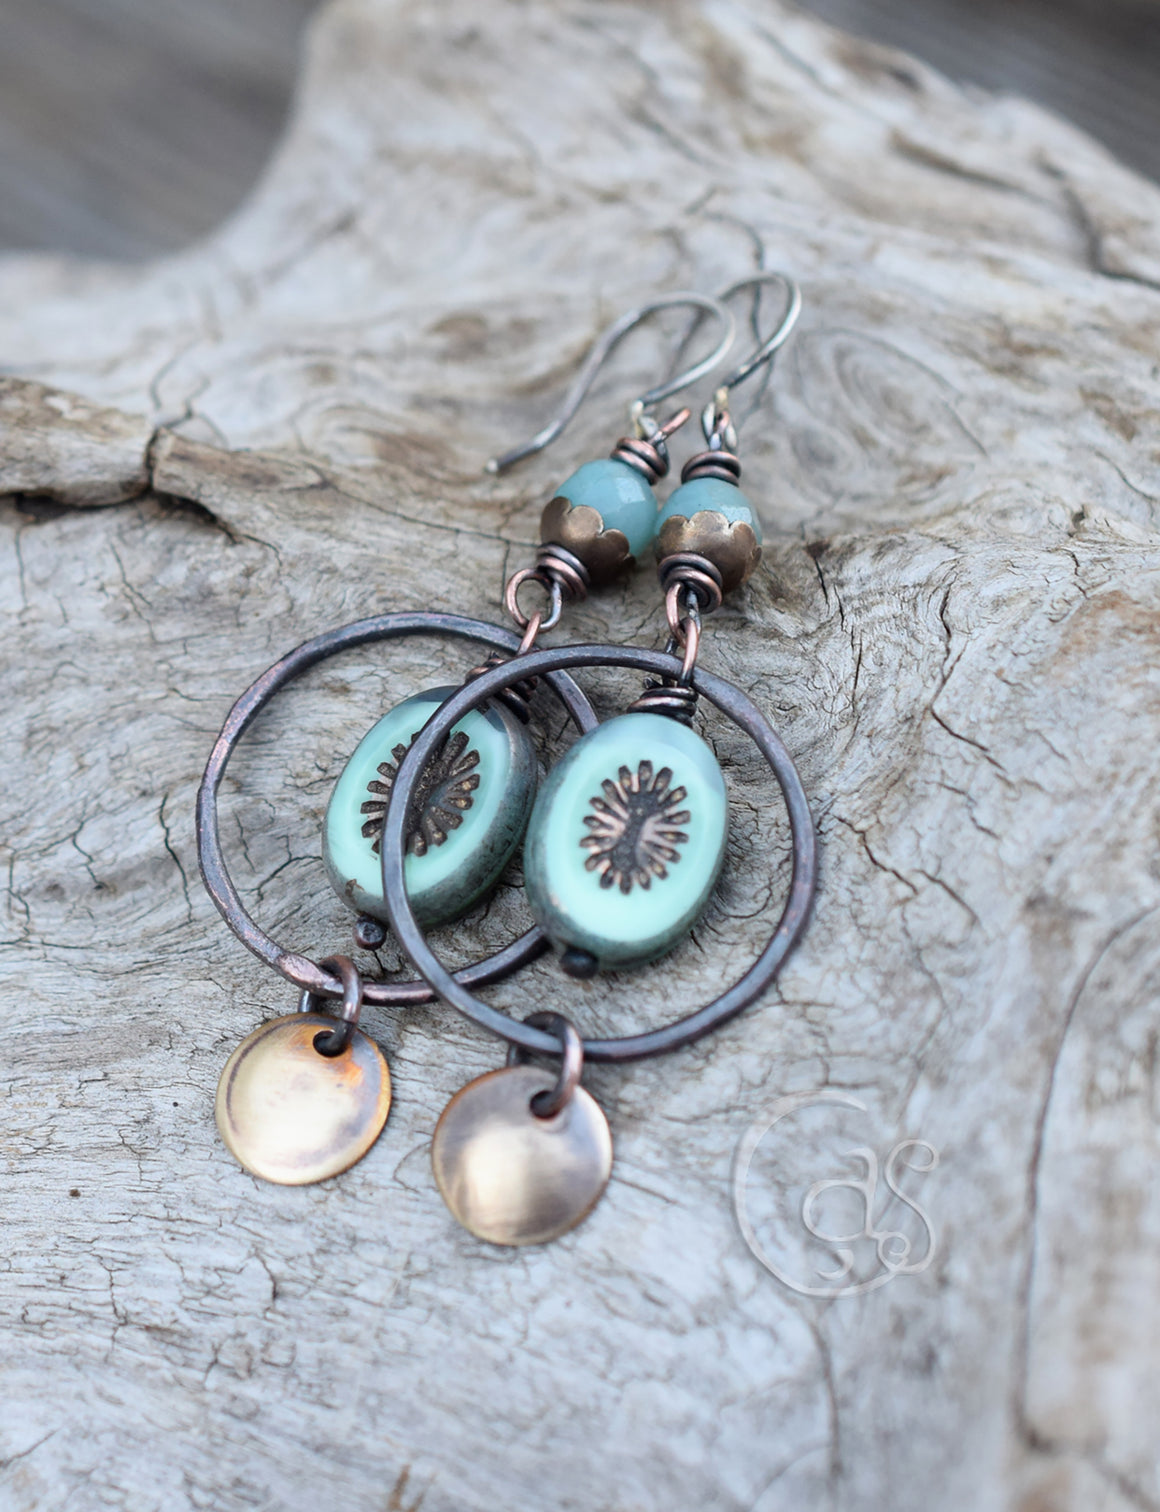 Rusty copper hoop earrings with blue beads that have golden star bursts on them. golden charms dangle below. The top of the earrings have blue stone beads with brass flower caps. The ear wires are silver. These earrings are laying flat on a piece of driftwood. 